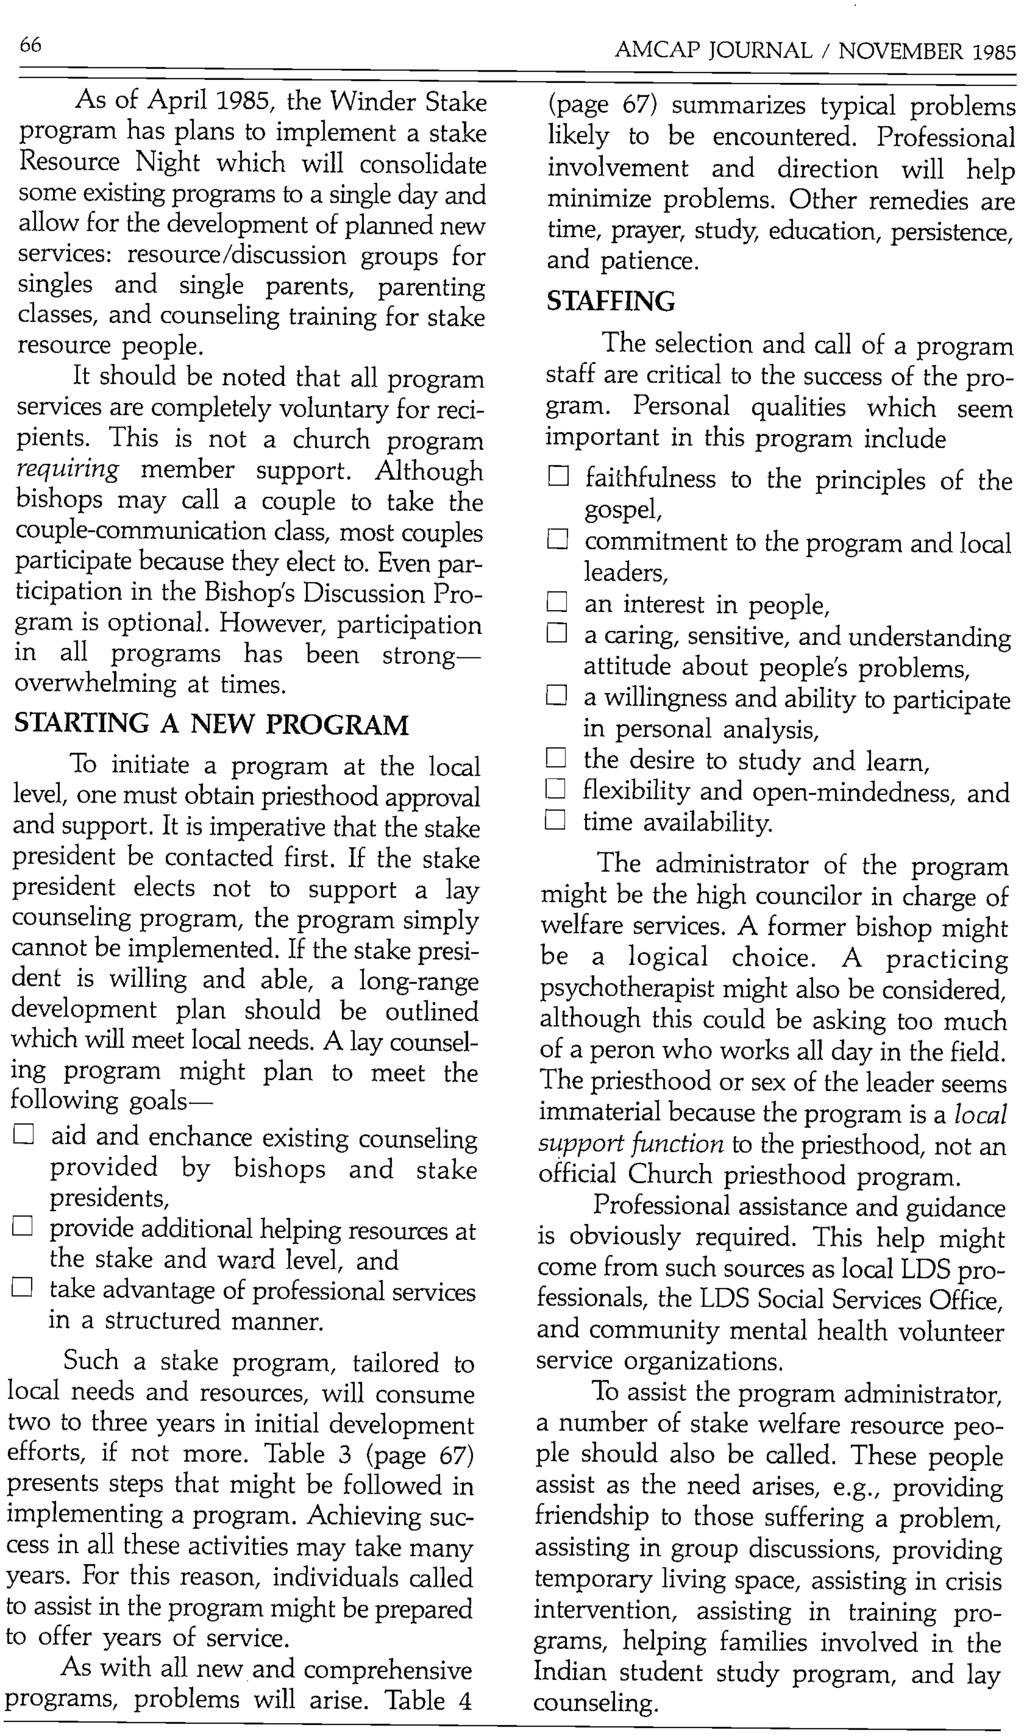 66 As of April 1985, the Winder Stake program has plans to implement a stake Resource Night which will consolidate some existing programs to a single day and allow for the development of planned new